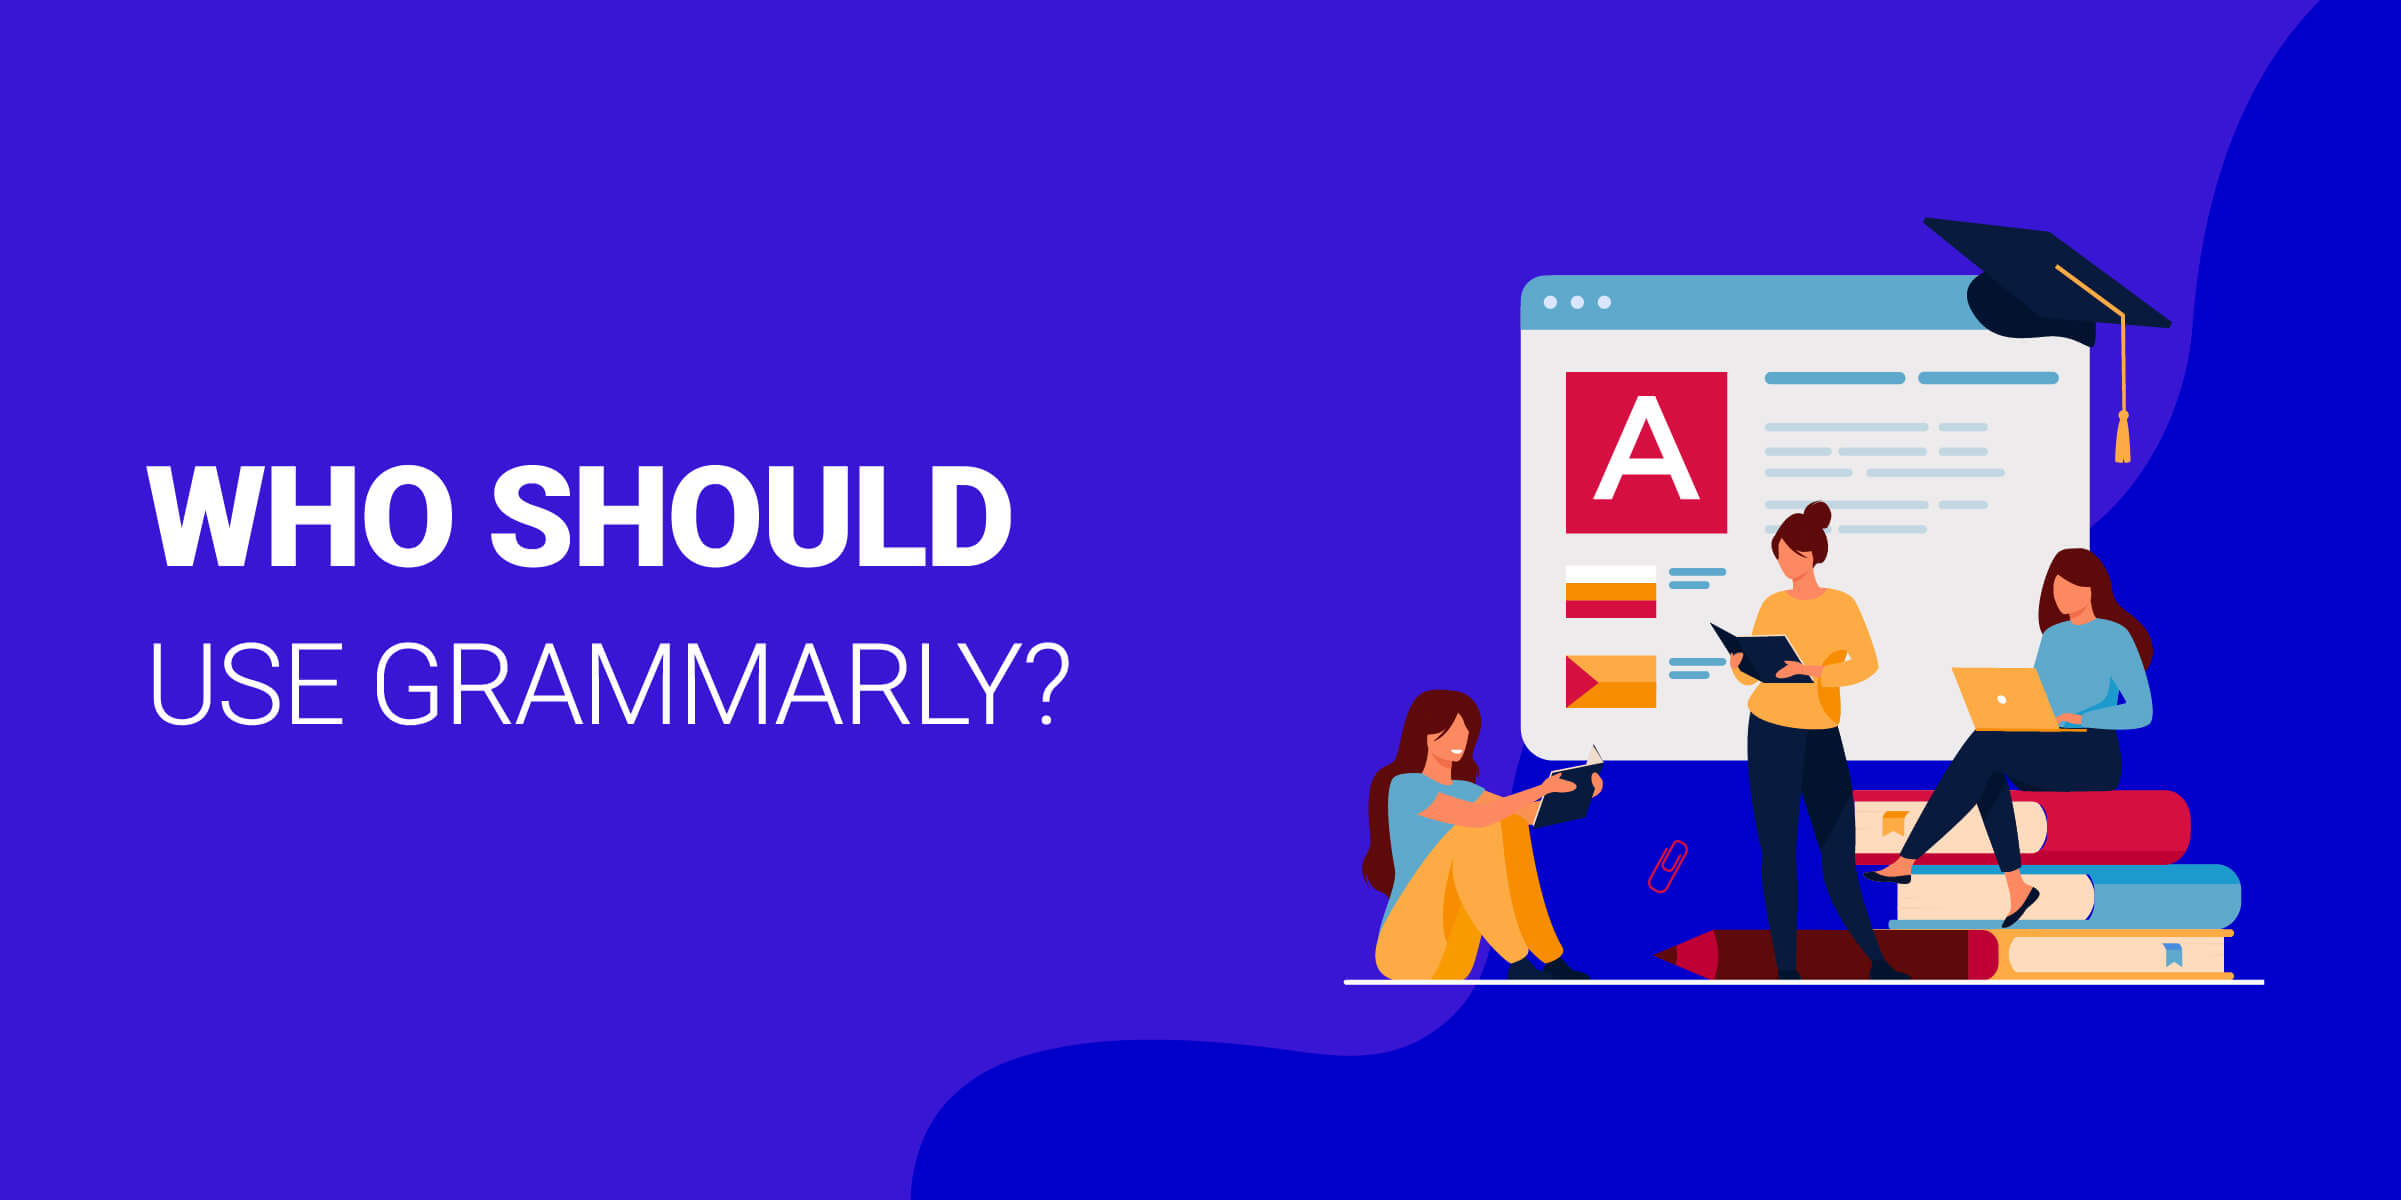 Who Should Use Grammarly